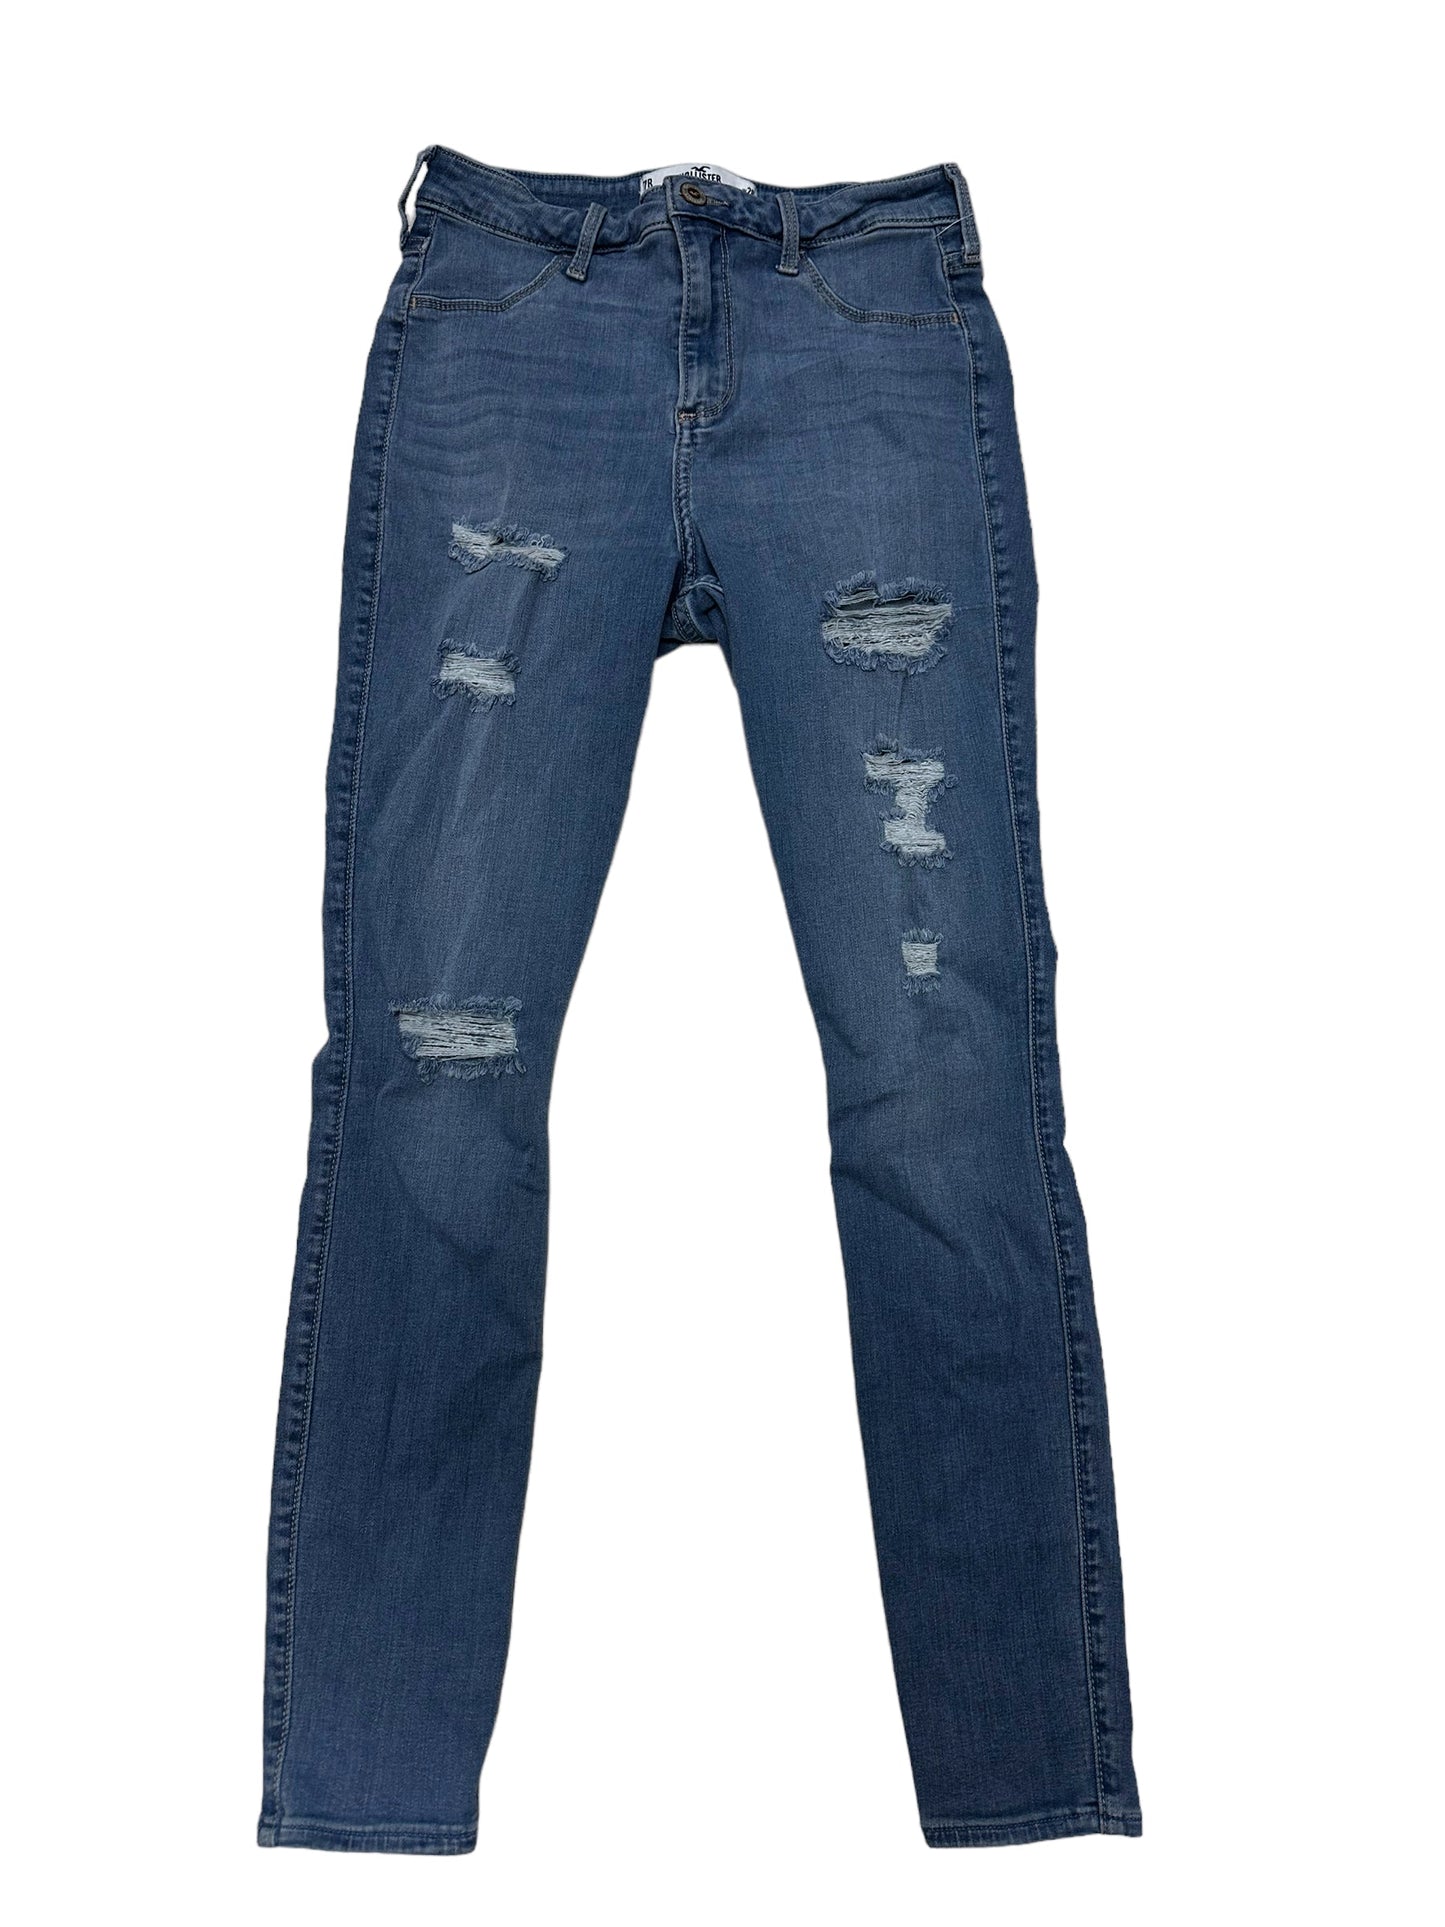 Jeans Skinny By Hollister  Size: 8